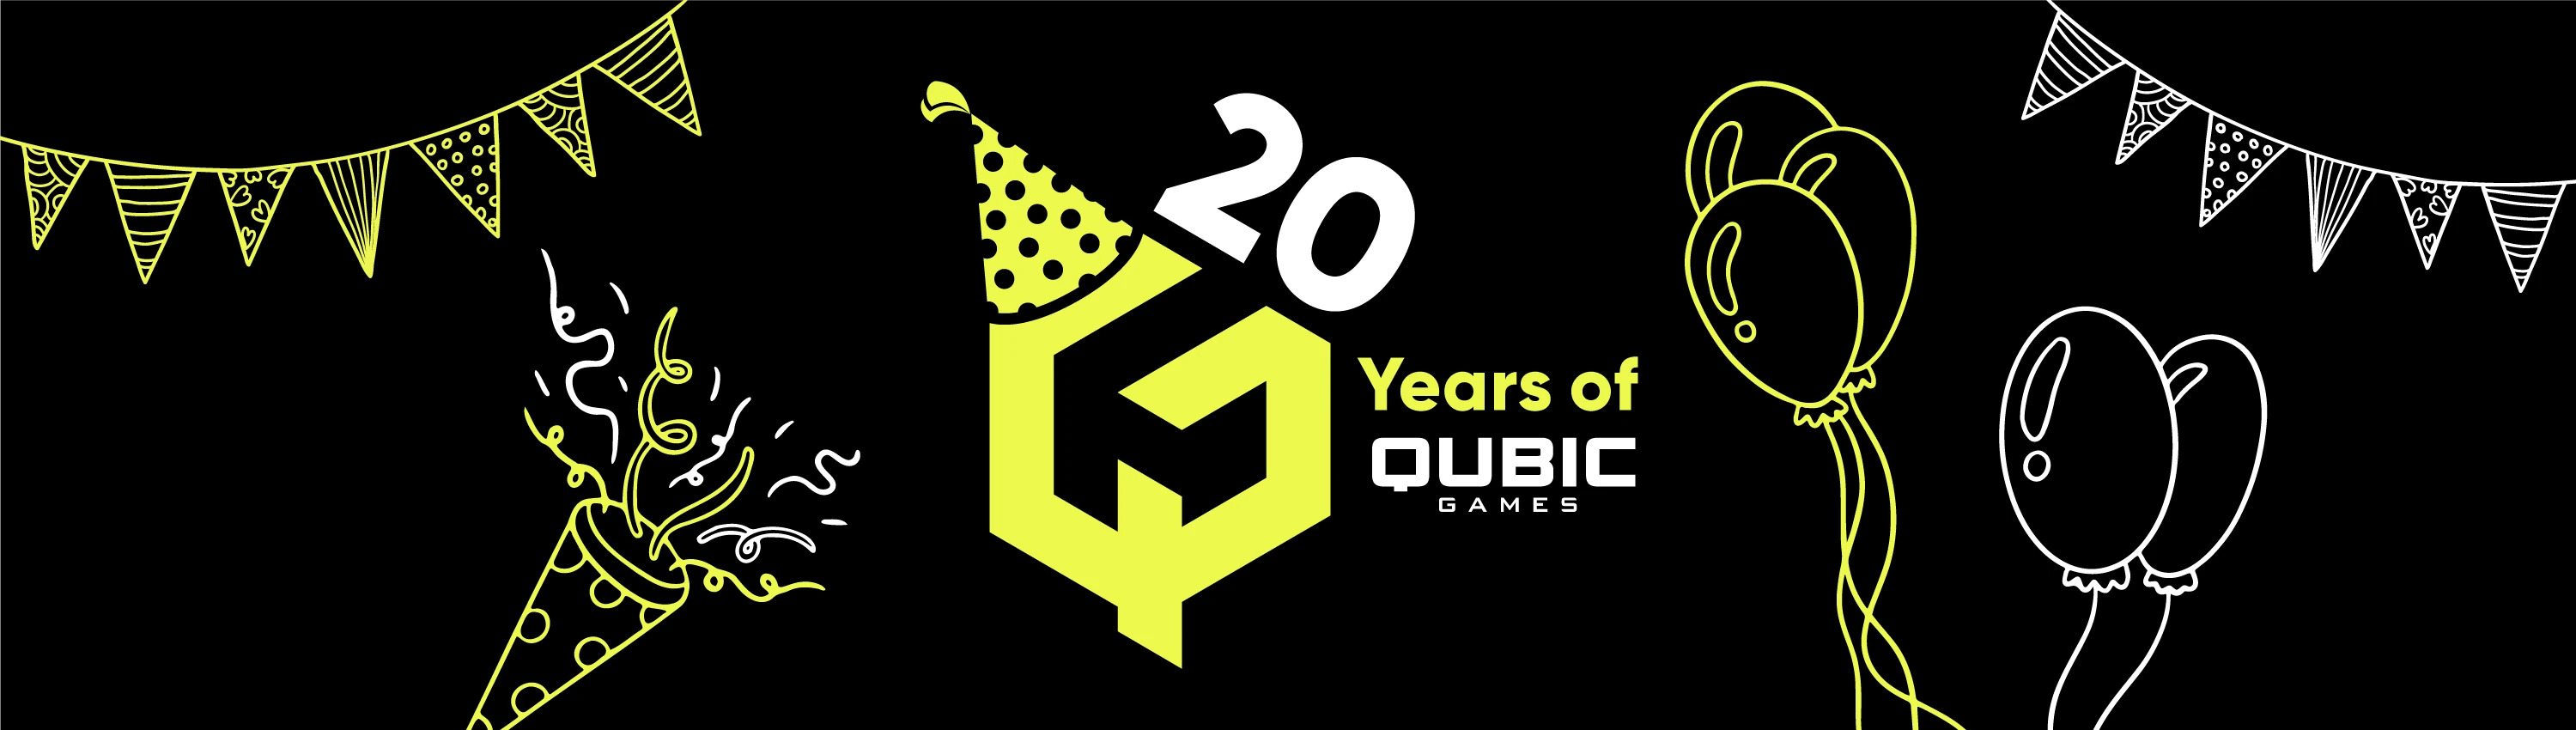 Qubic Games 20th Anniversary Sale: 100 Titles $0.20 Each (Nintendo Switch Digital Download)